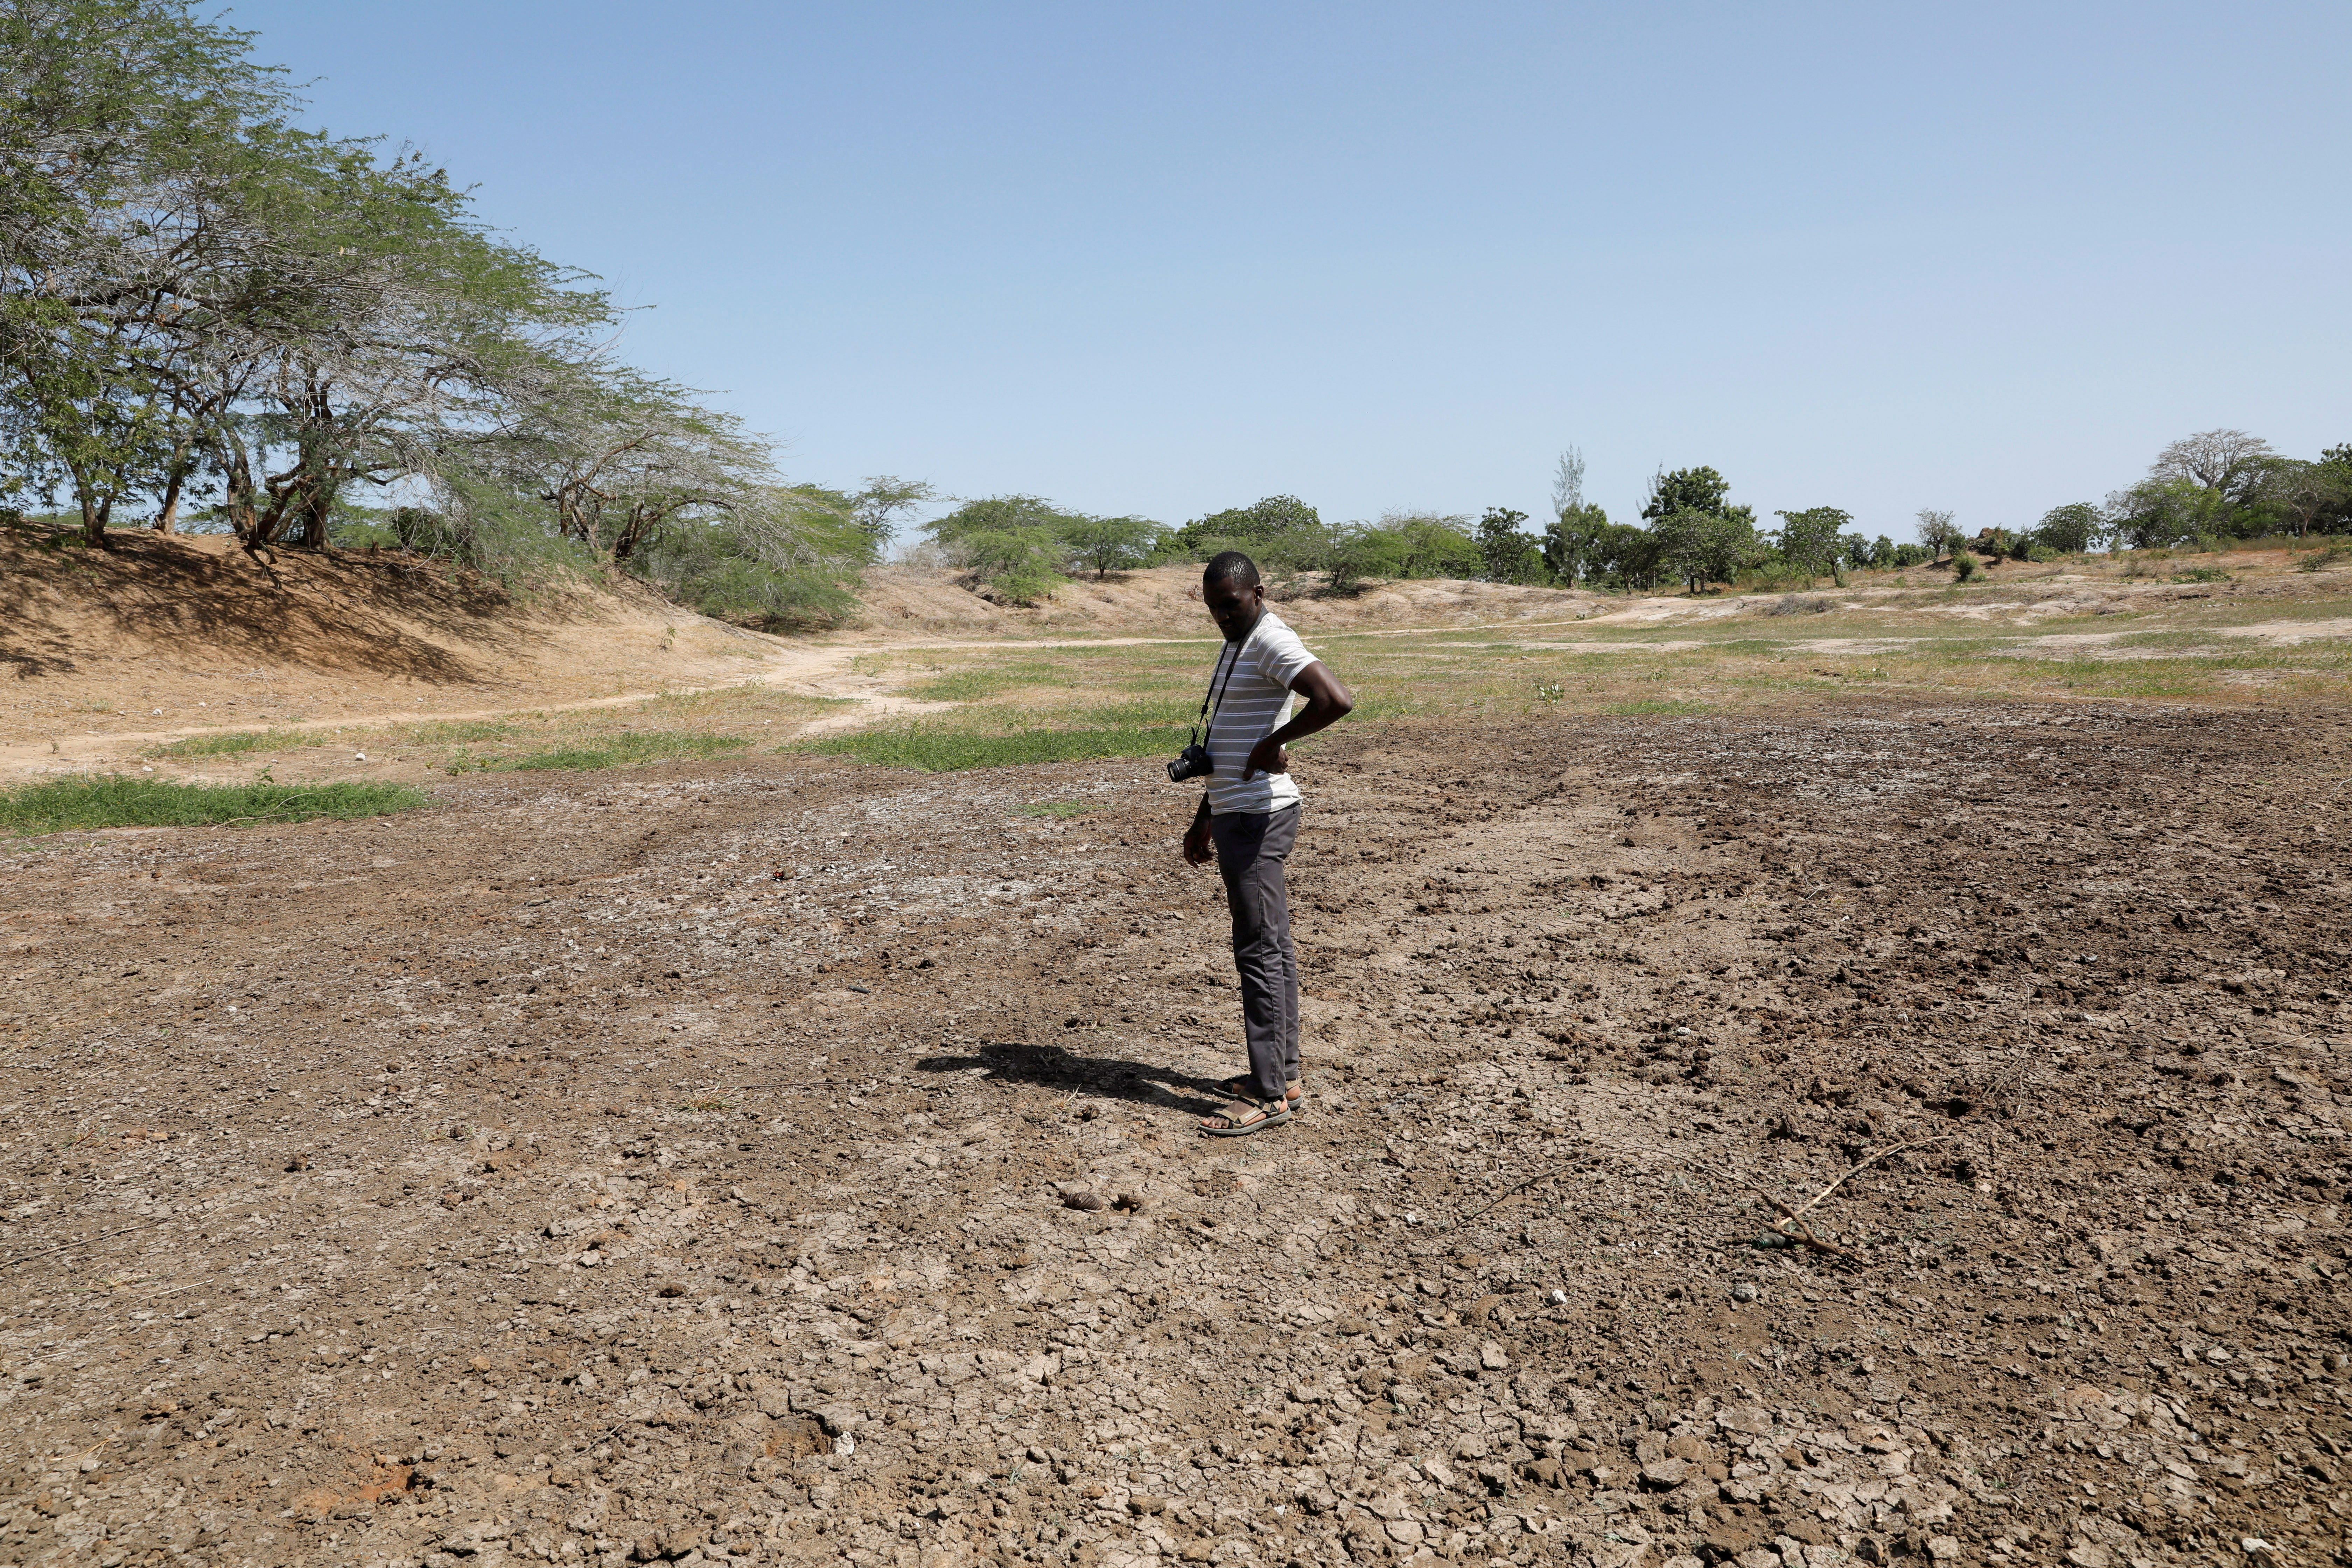 FEWS NET scientist Chris Shitote examines a dry water hole in Kilifi county